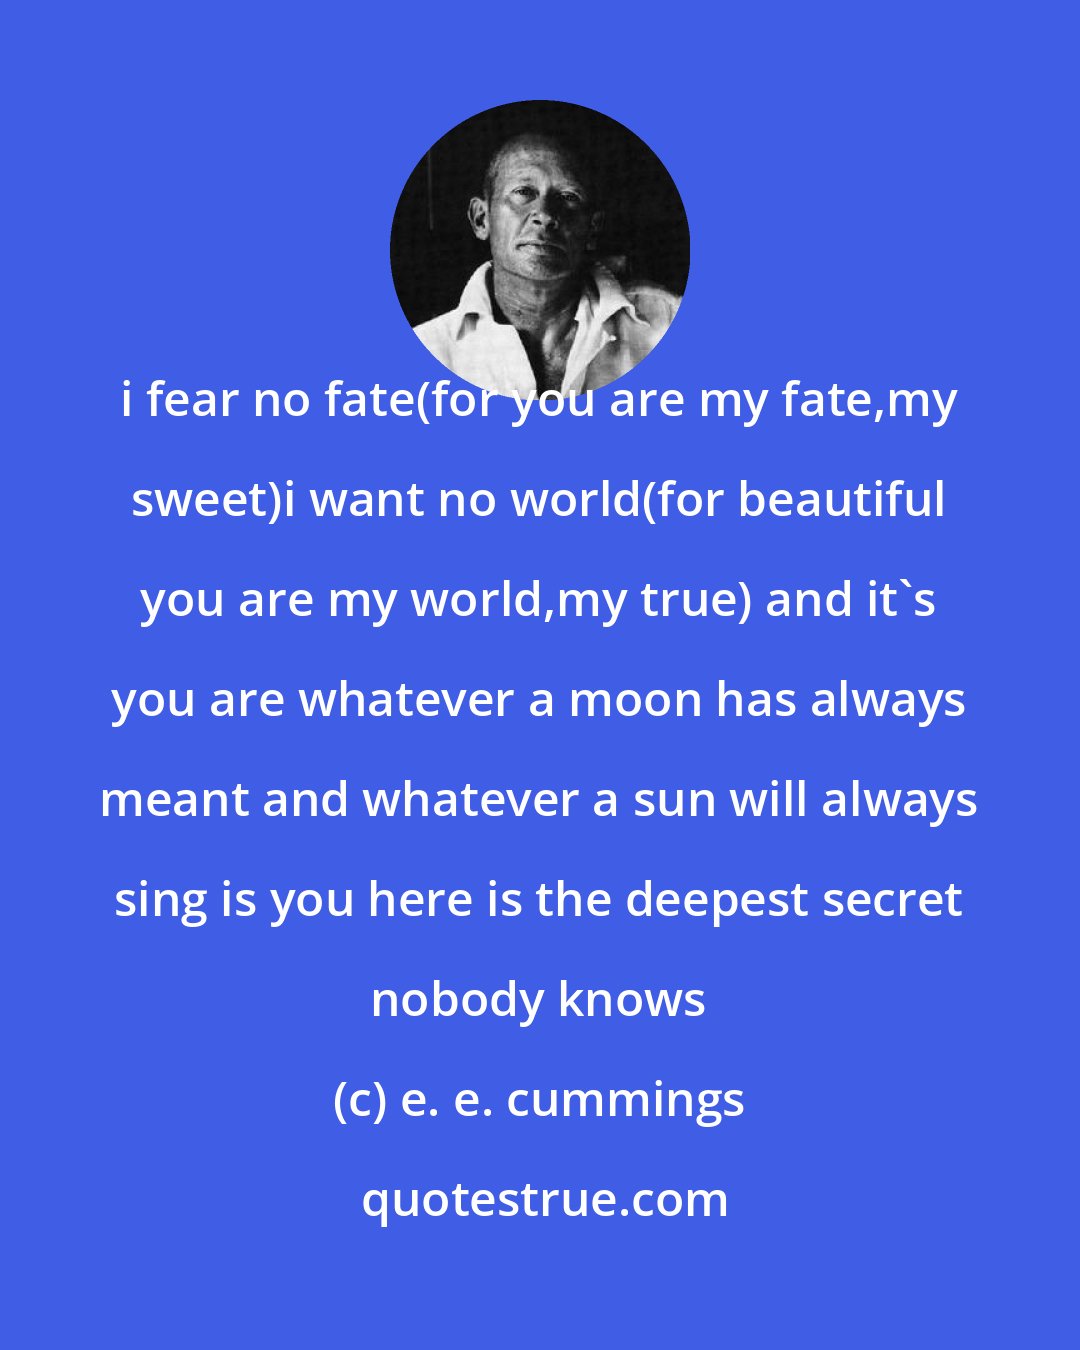 e. e. cummings: i fear no fate(for you are my fate,my sweet)i want no world(for beautiful you are my world,my true) and it's you are whatever a moon has always meant and whatever a sun will always sing is you here is the deepest secret nobody knows